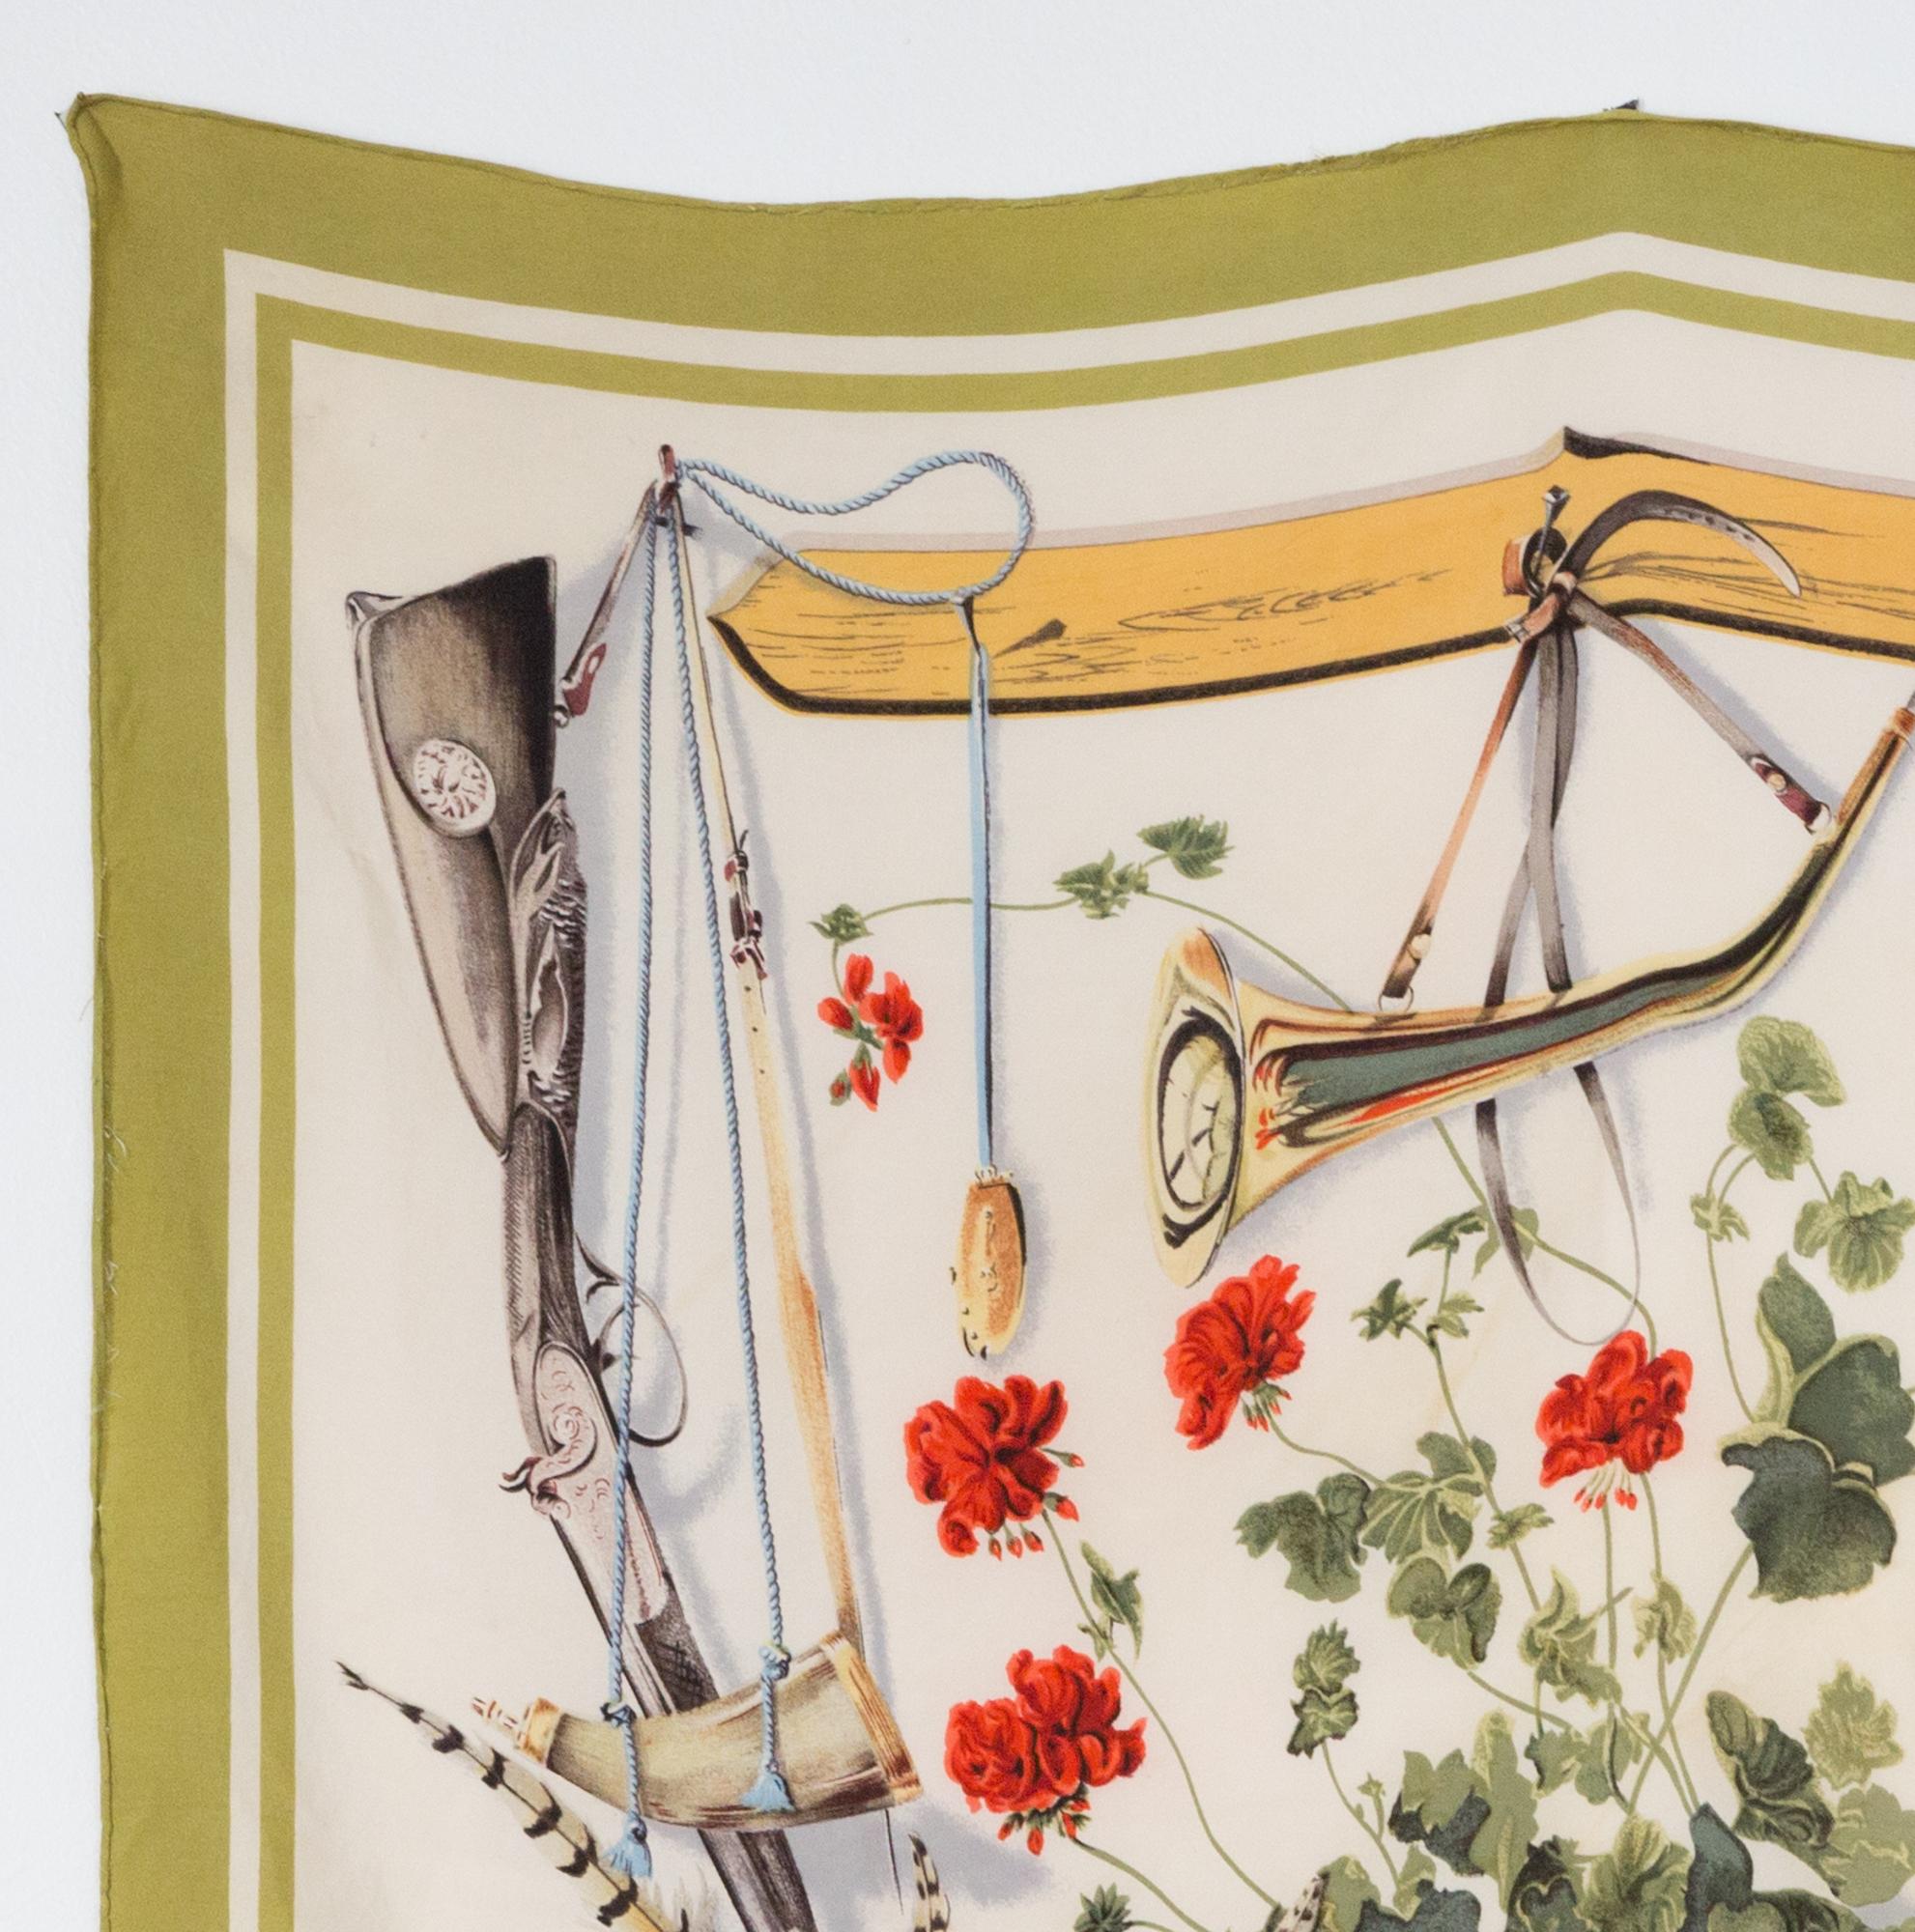 Hermes silk scarf Tableau de chasse by Henri de Linares featuring a green outline.
In good vintage condition. Made in France.
35,4in. (90cm)  X 35,4in. (90cm)
We guarantee you will receive this  iconic item as described and showed on photos.
(please